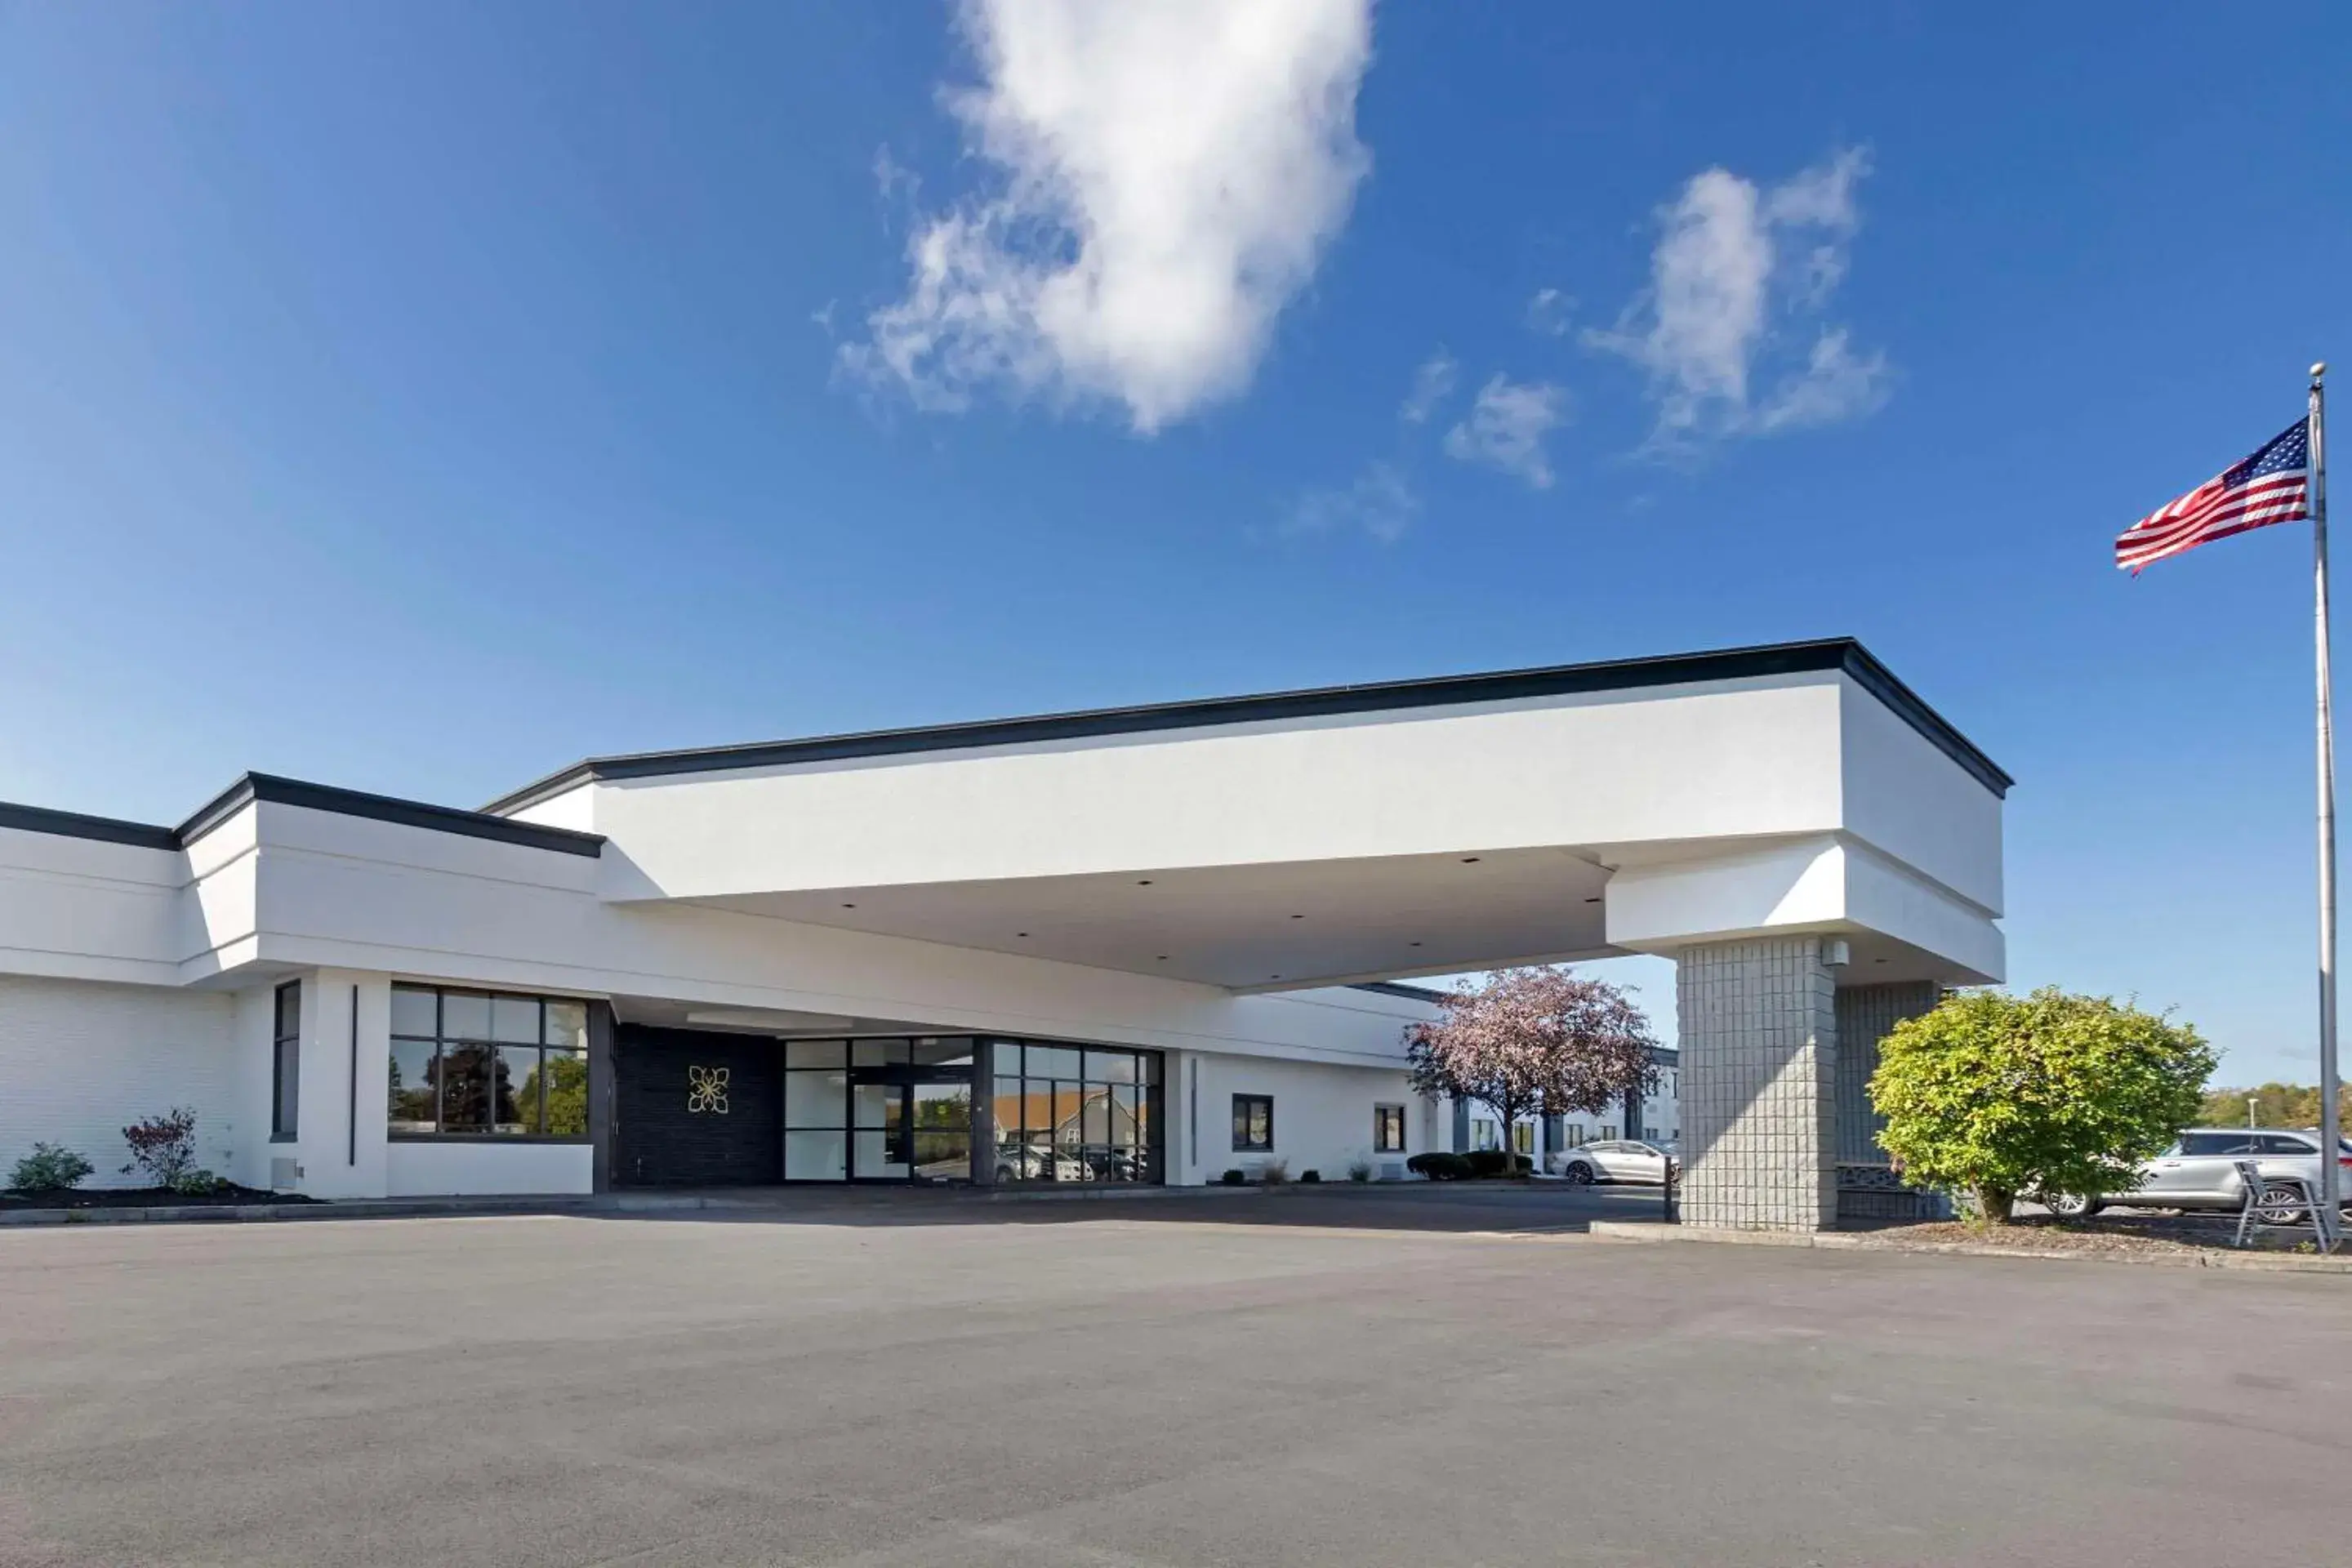 Property Building in Quality Inn near Finger Lakes and Seneca Falls